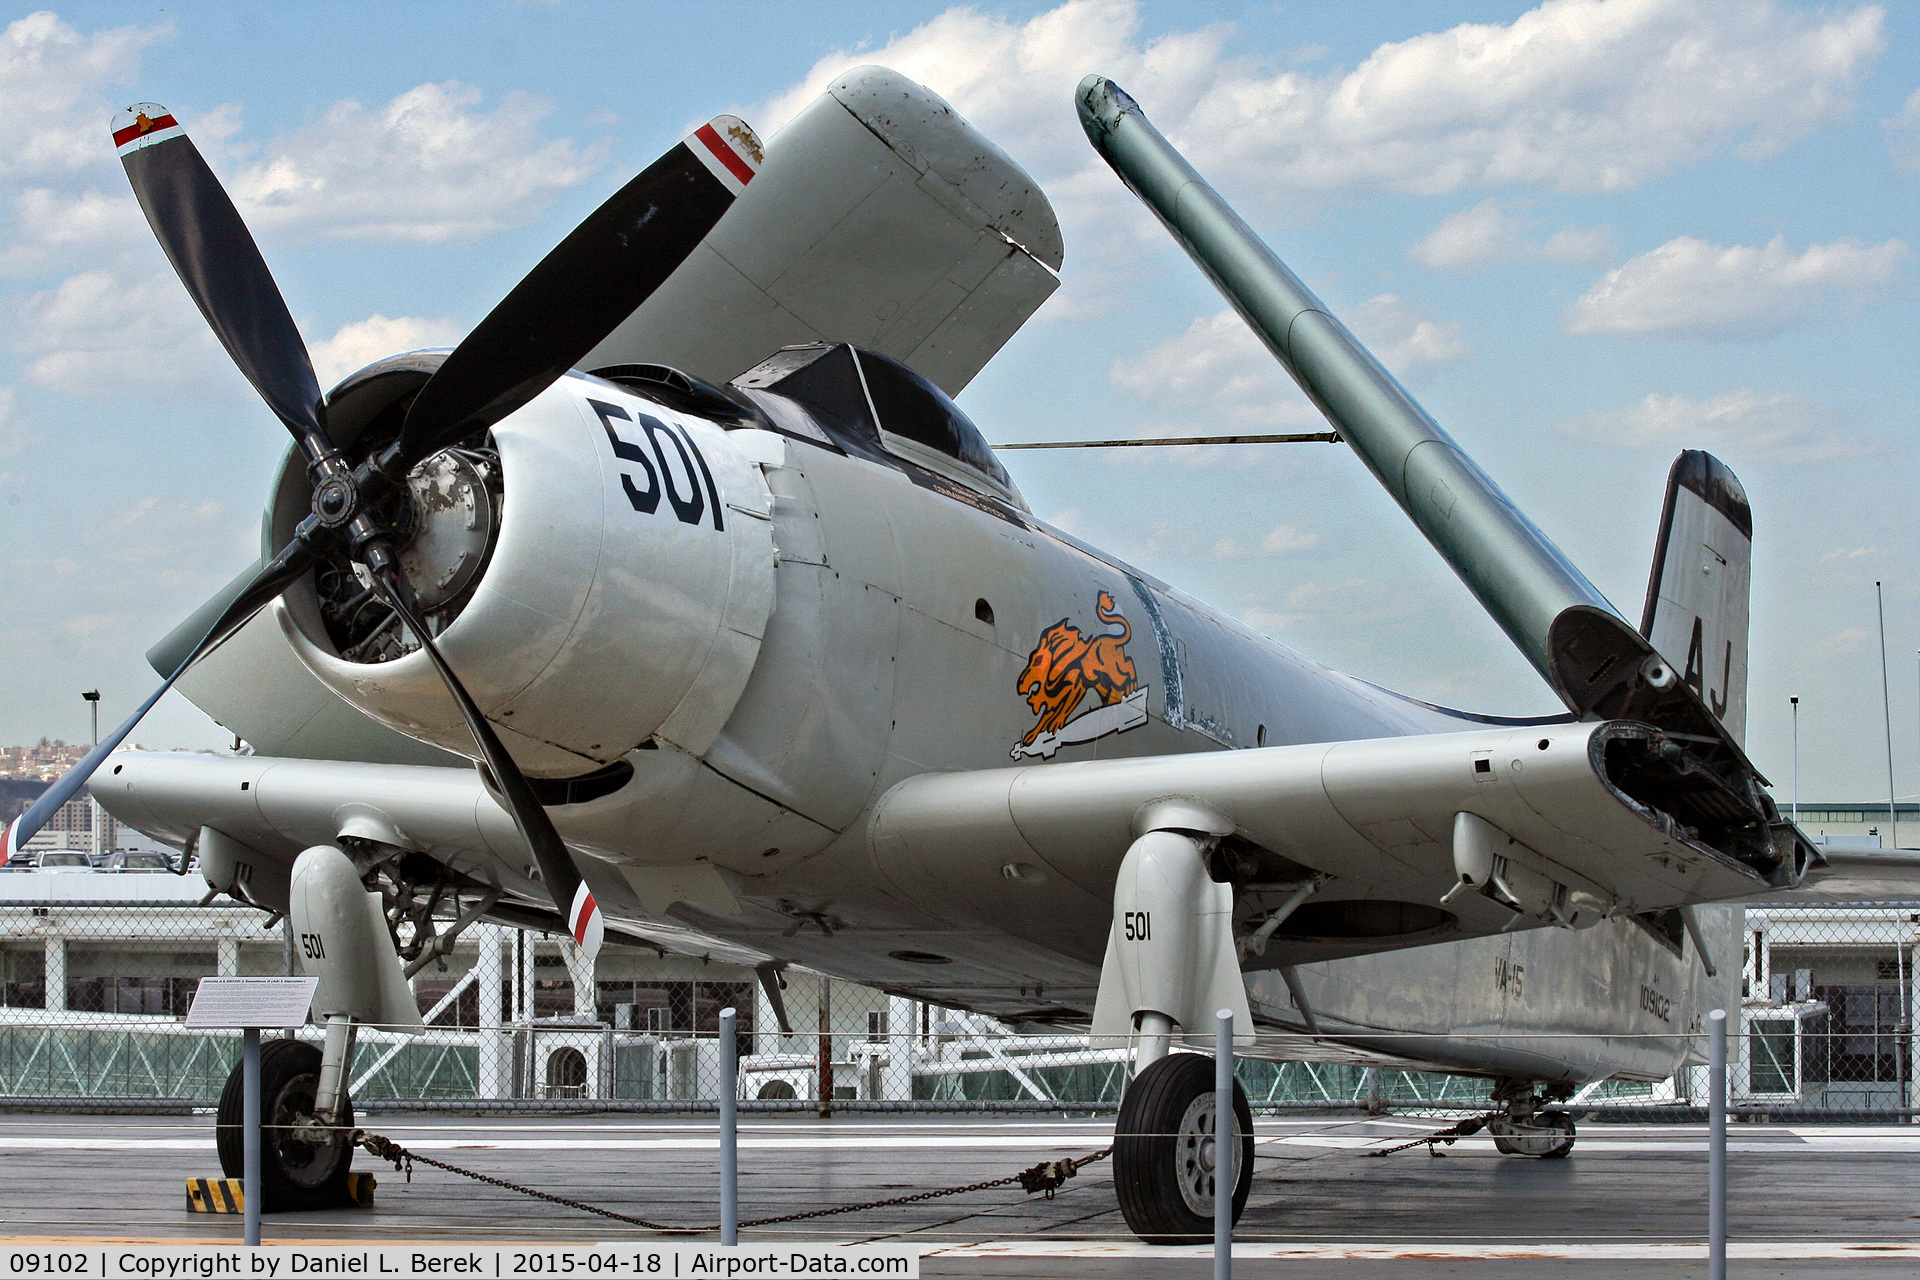 09102, Douglas XBT2D-1 Skyraider C/N 1930, In 2014, this rare aircraft, a prototype and the oldest Skyraider, was brought to the U.S.S. Intrepid Air Sea Space Museum from the NAS Oceana Aviation Heritage Park.